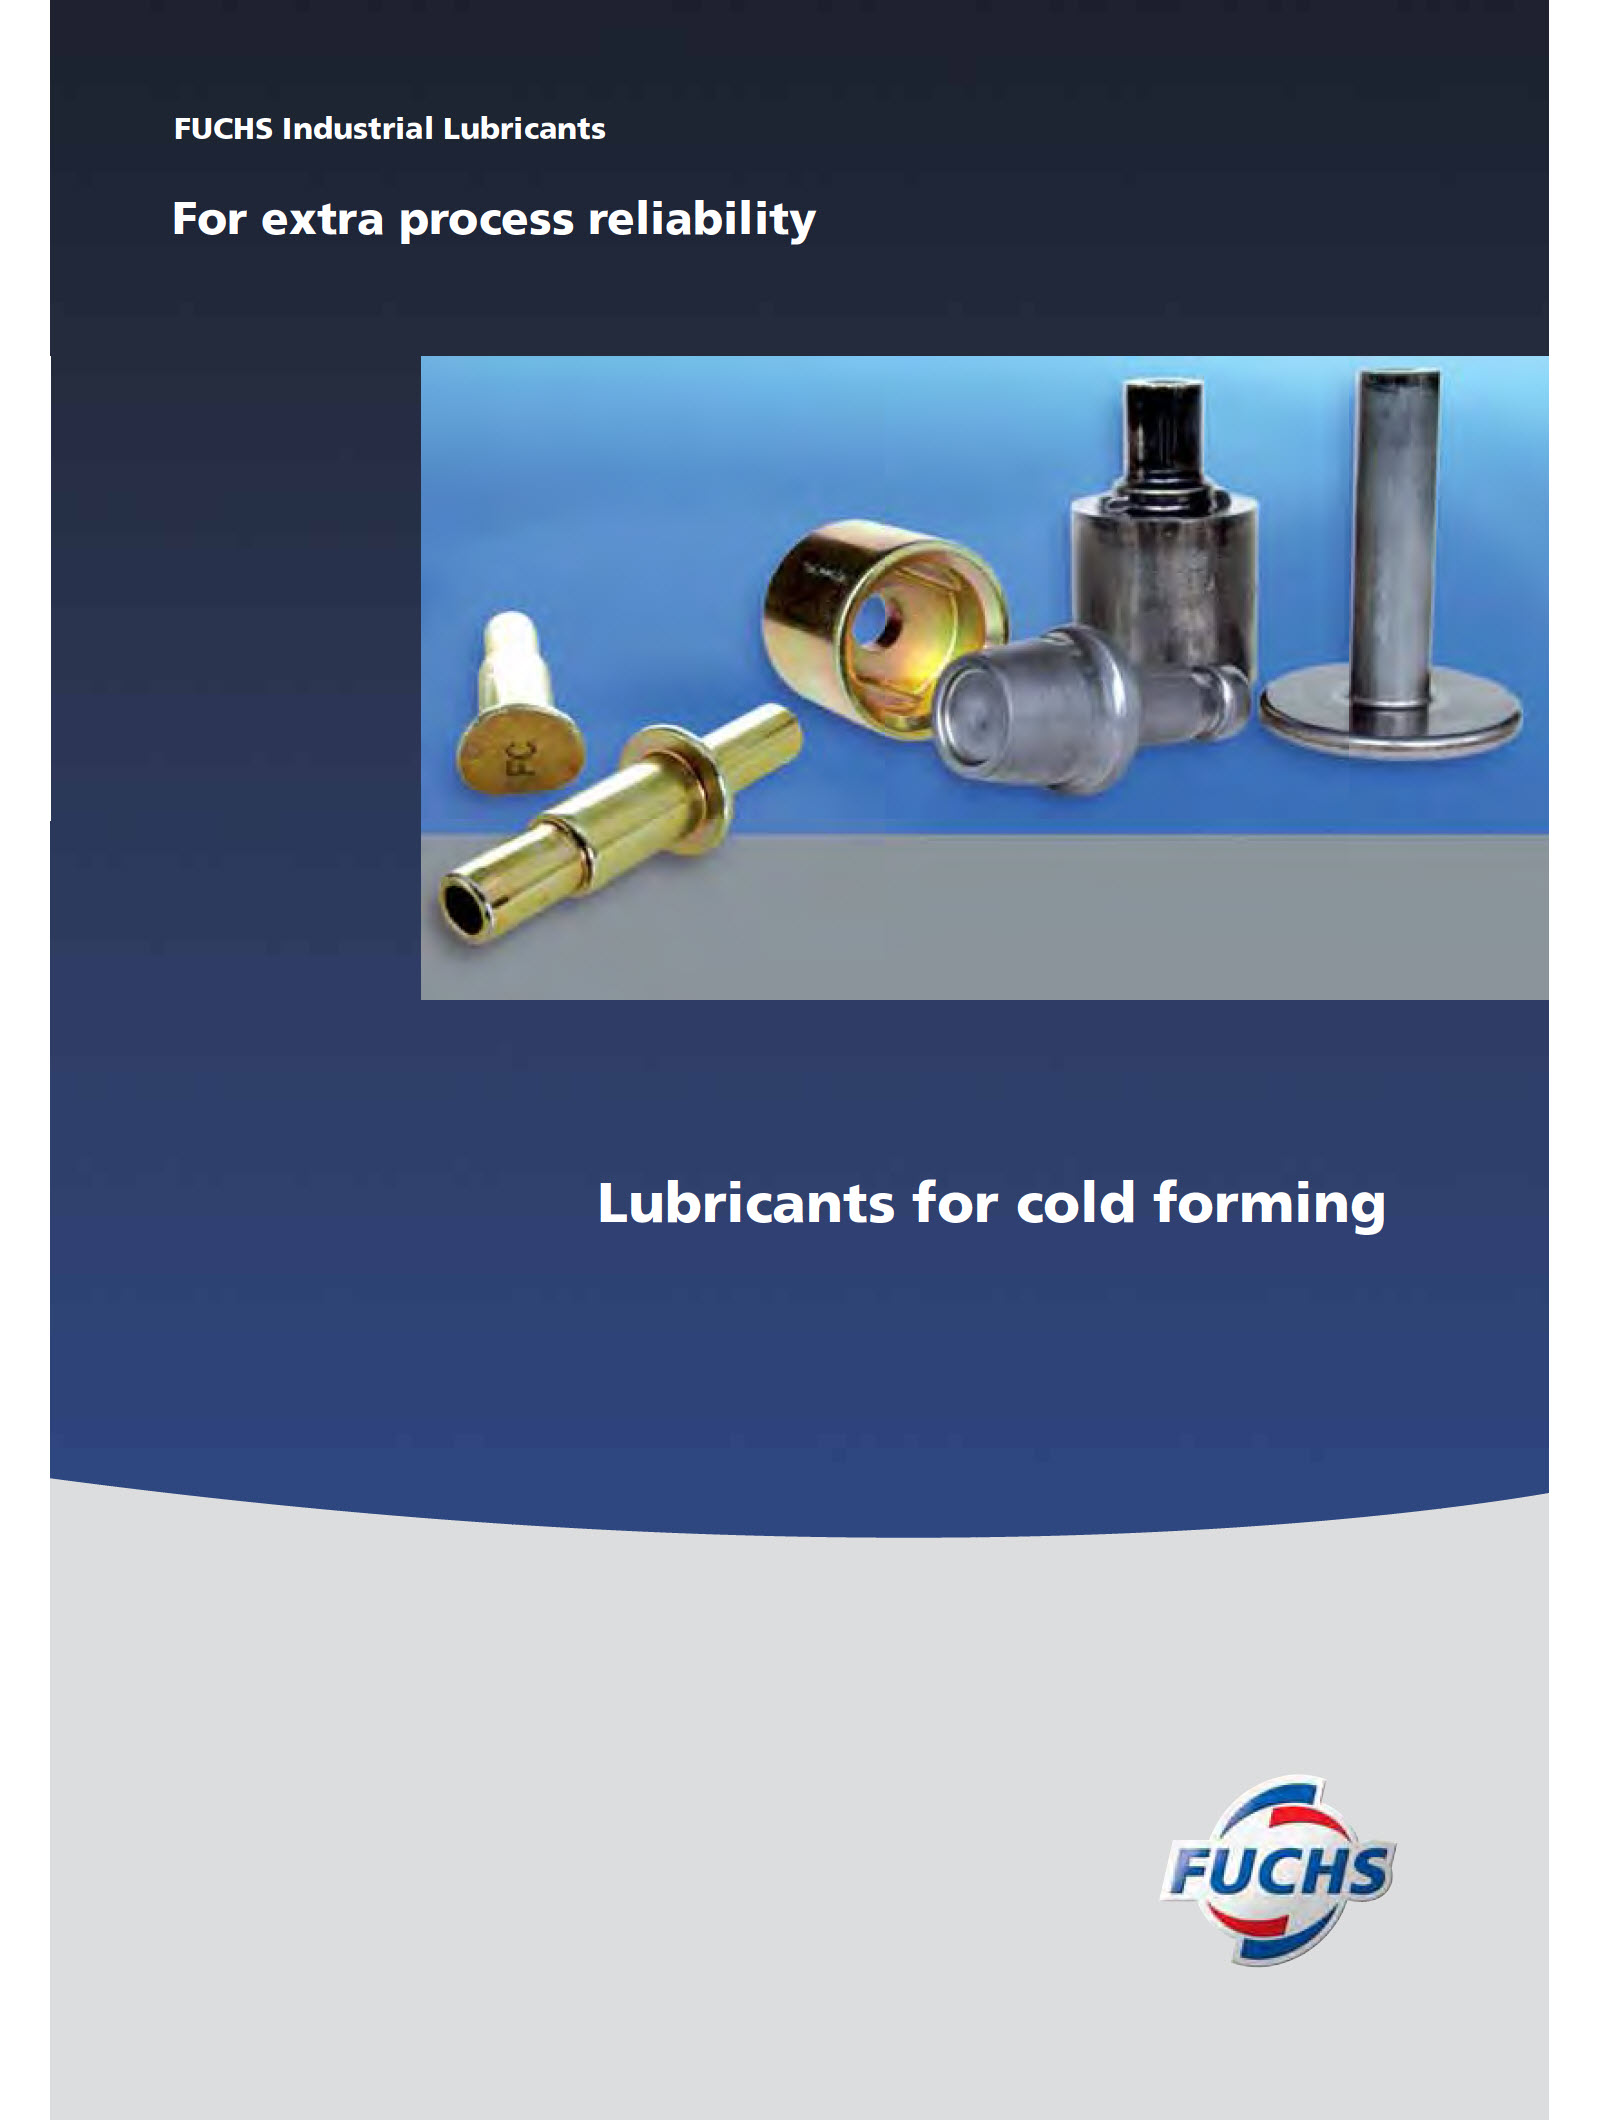 Cold Forming Lubricants